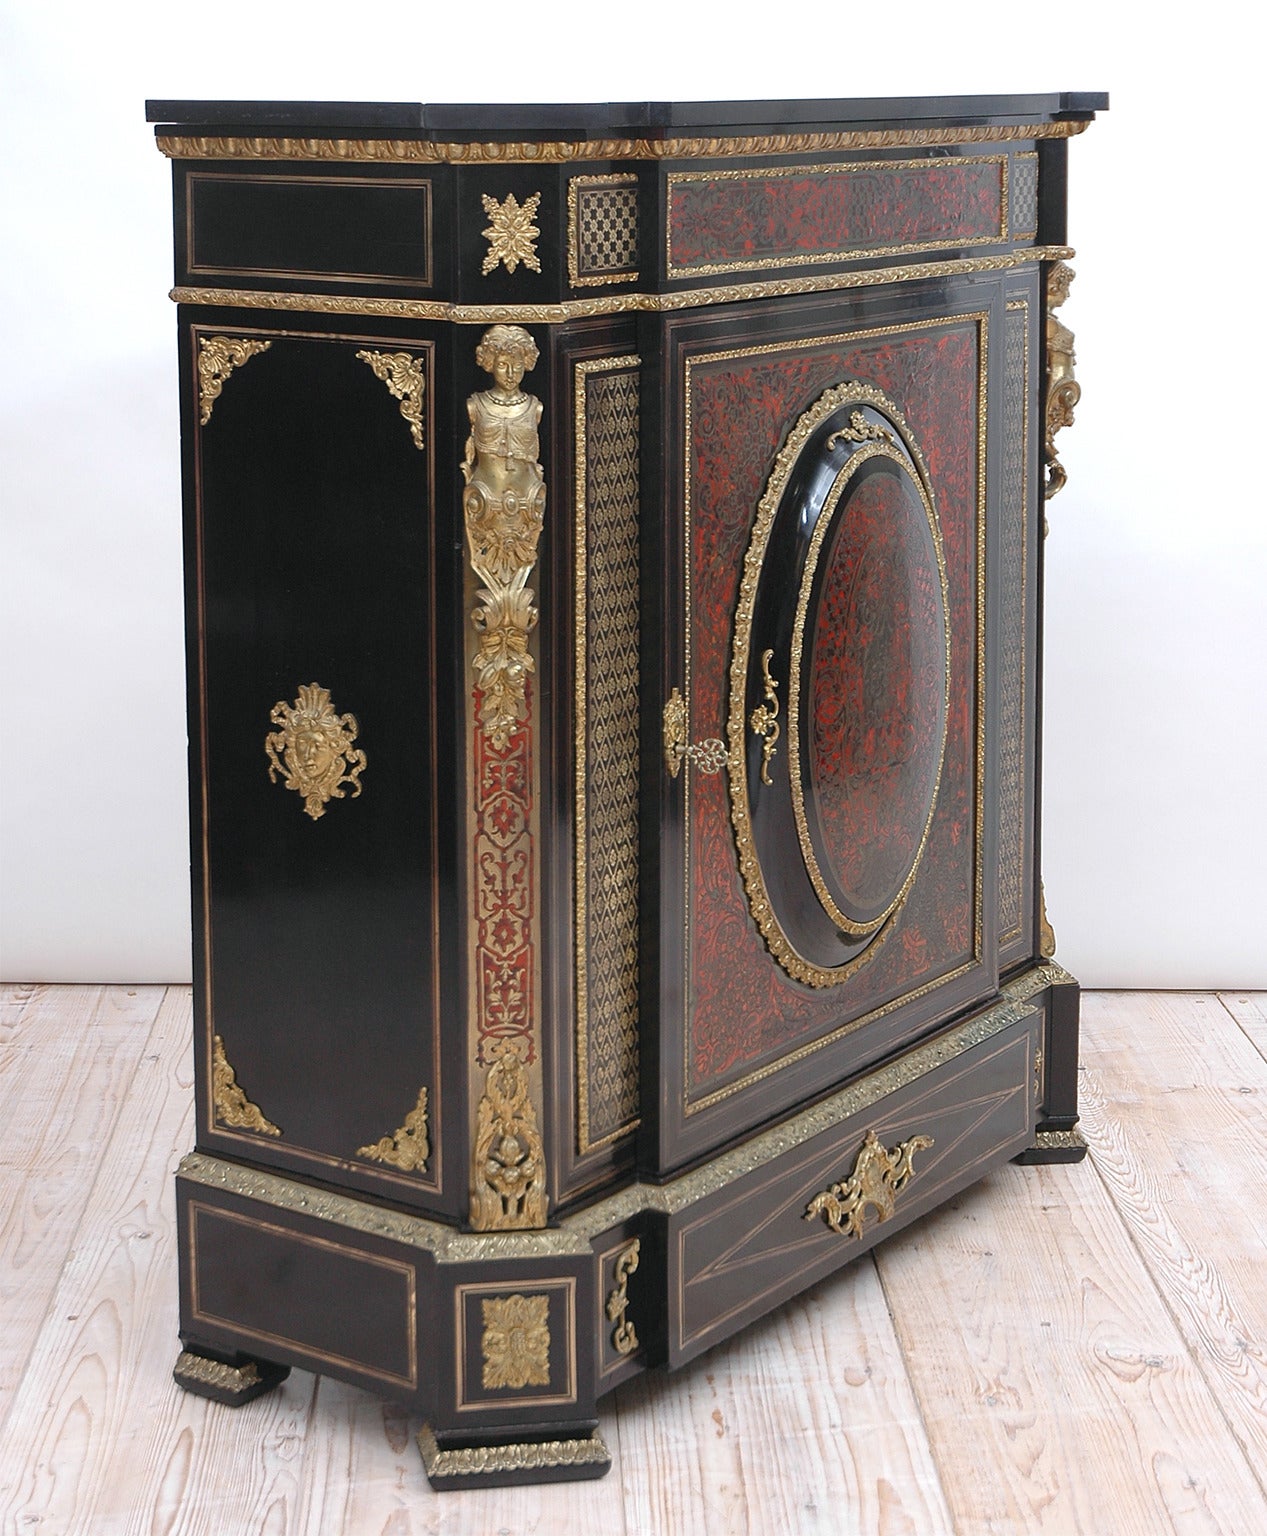 Napoleon III cabinet in manner of cabinet maker Boulle, France, circa 1865. Rich, well articulated bronze doré castings and ormolu, Belgium black marble, tortoise shell and brass inlays. Height approximately 116 cm. 118 cm x 43 cm.
All of the loose